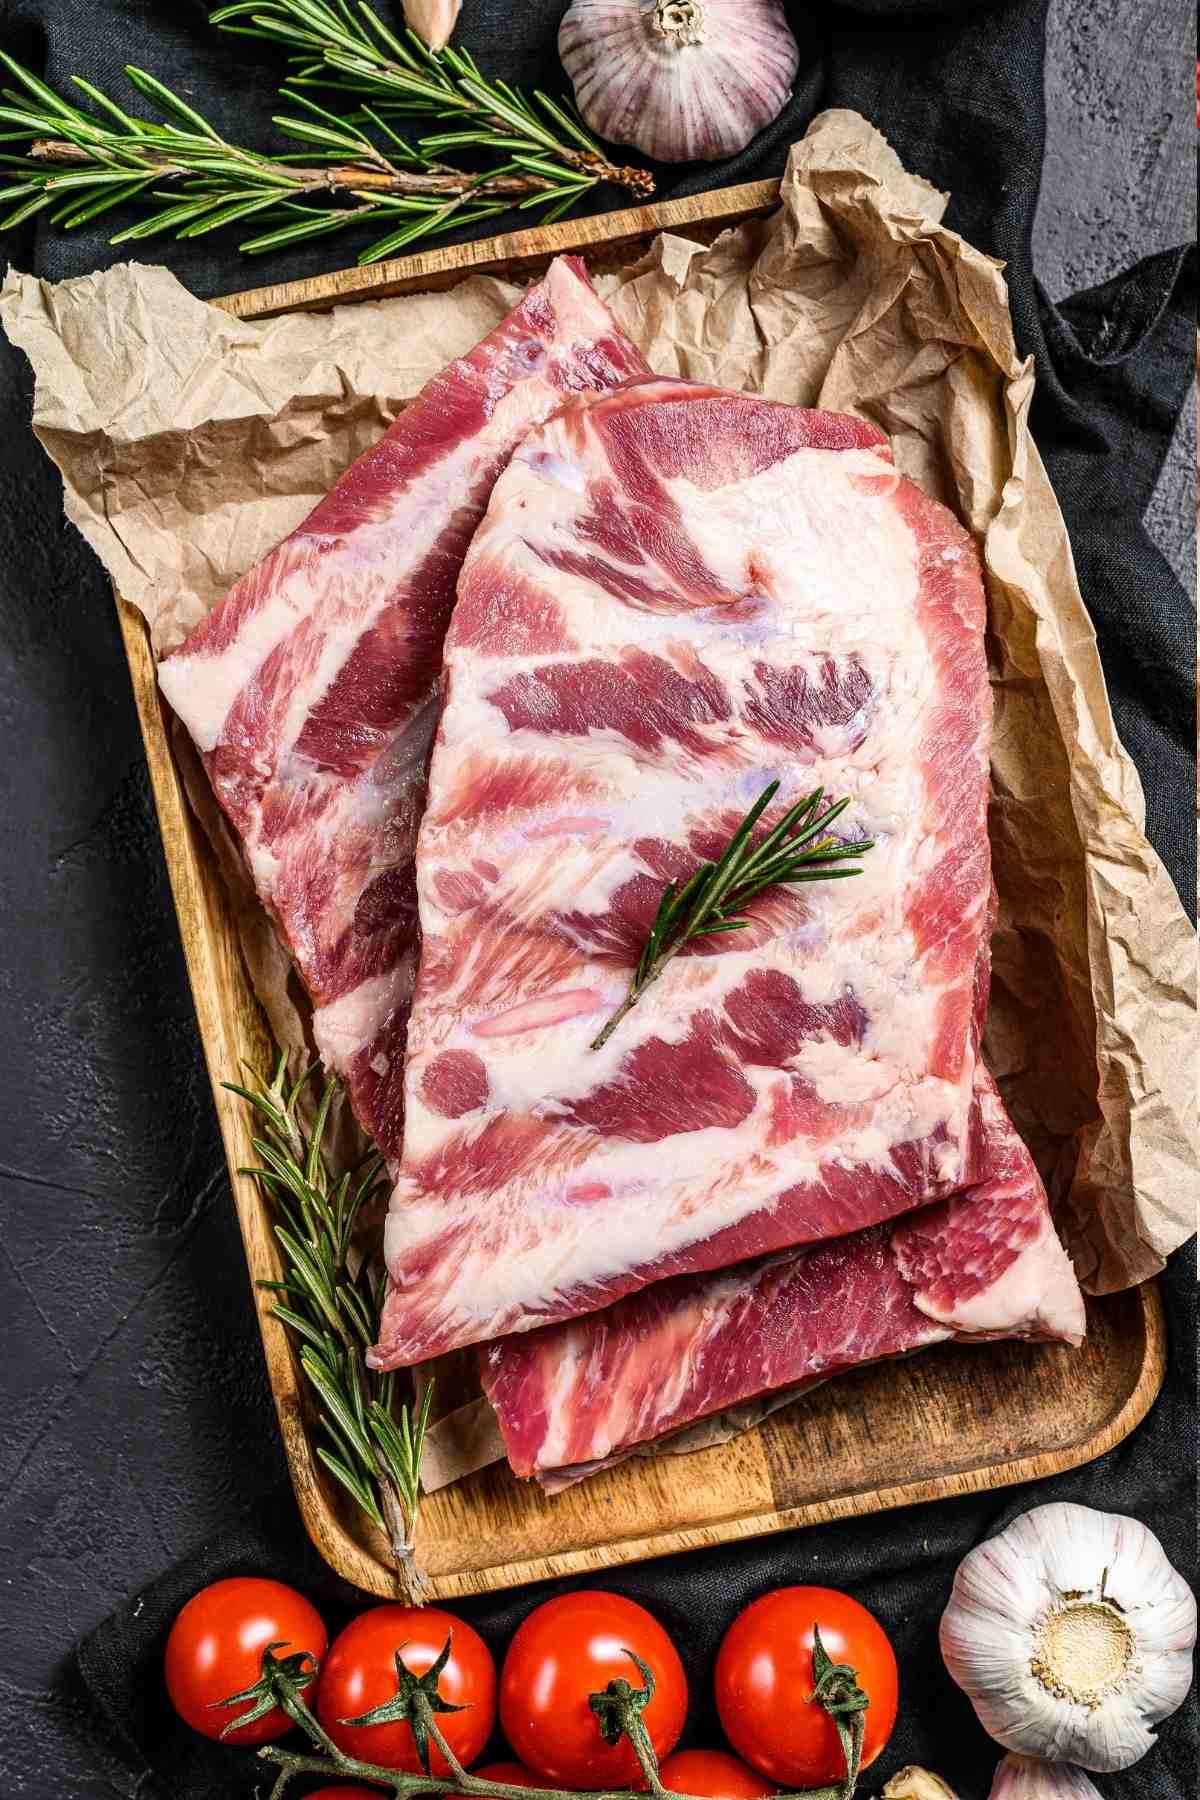 If you’re not familiar with baby back ribs, you might wonder if they’re pork or beef. In this article, we’ll cover the difference between baby back ribs, pork ribs, and beef ribs.